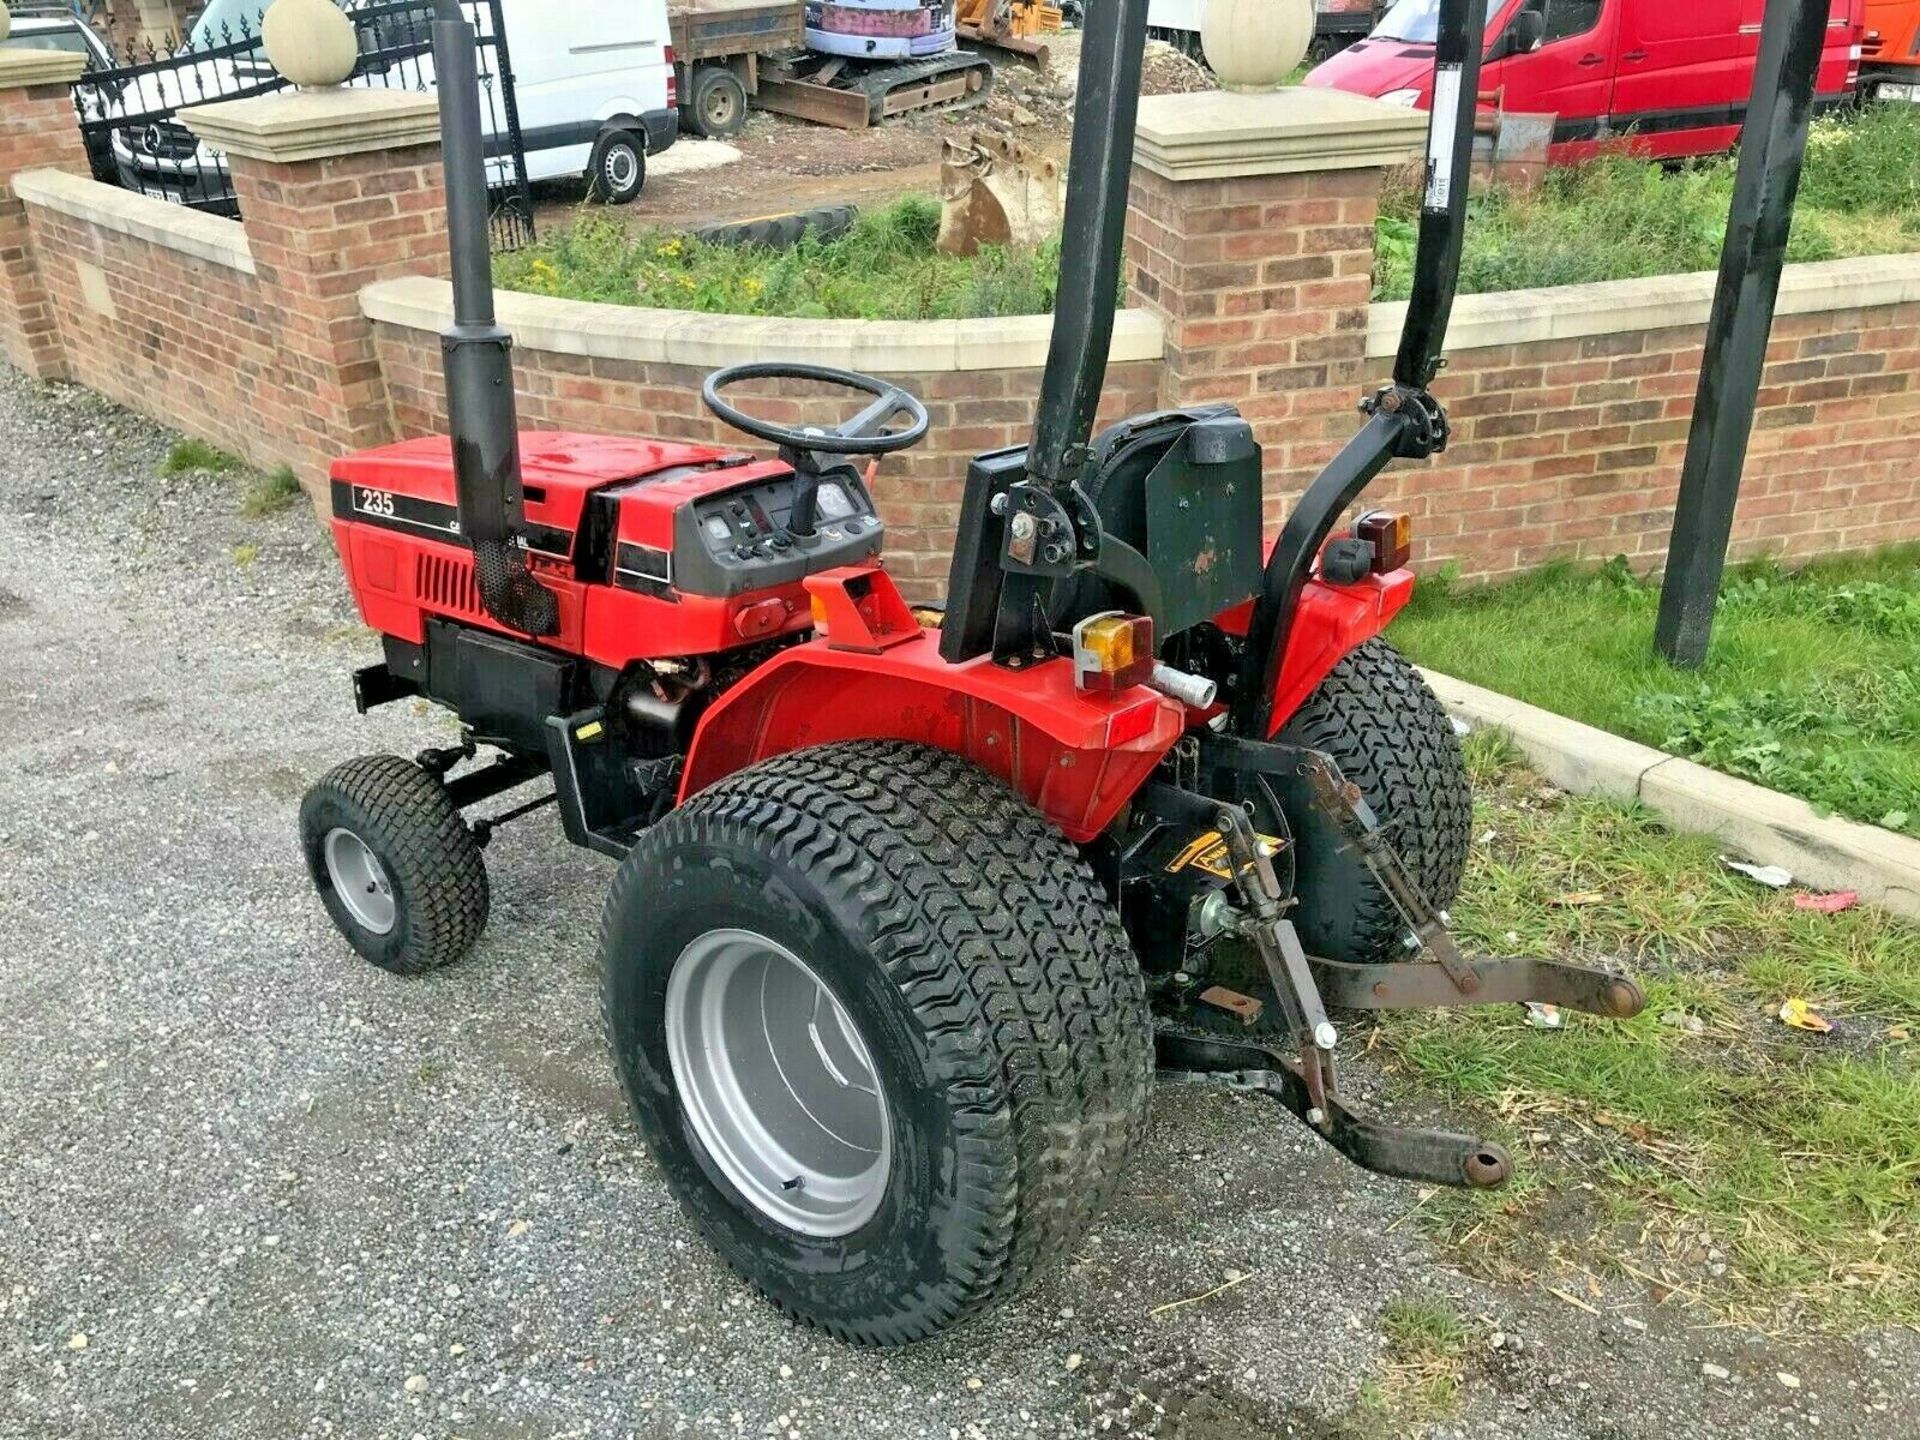 Case International 234 Compact Tractor - Image 3 of 10